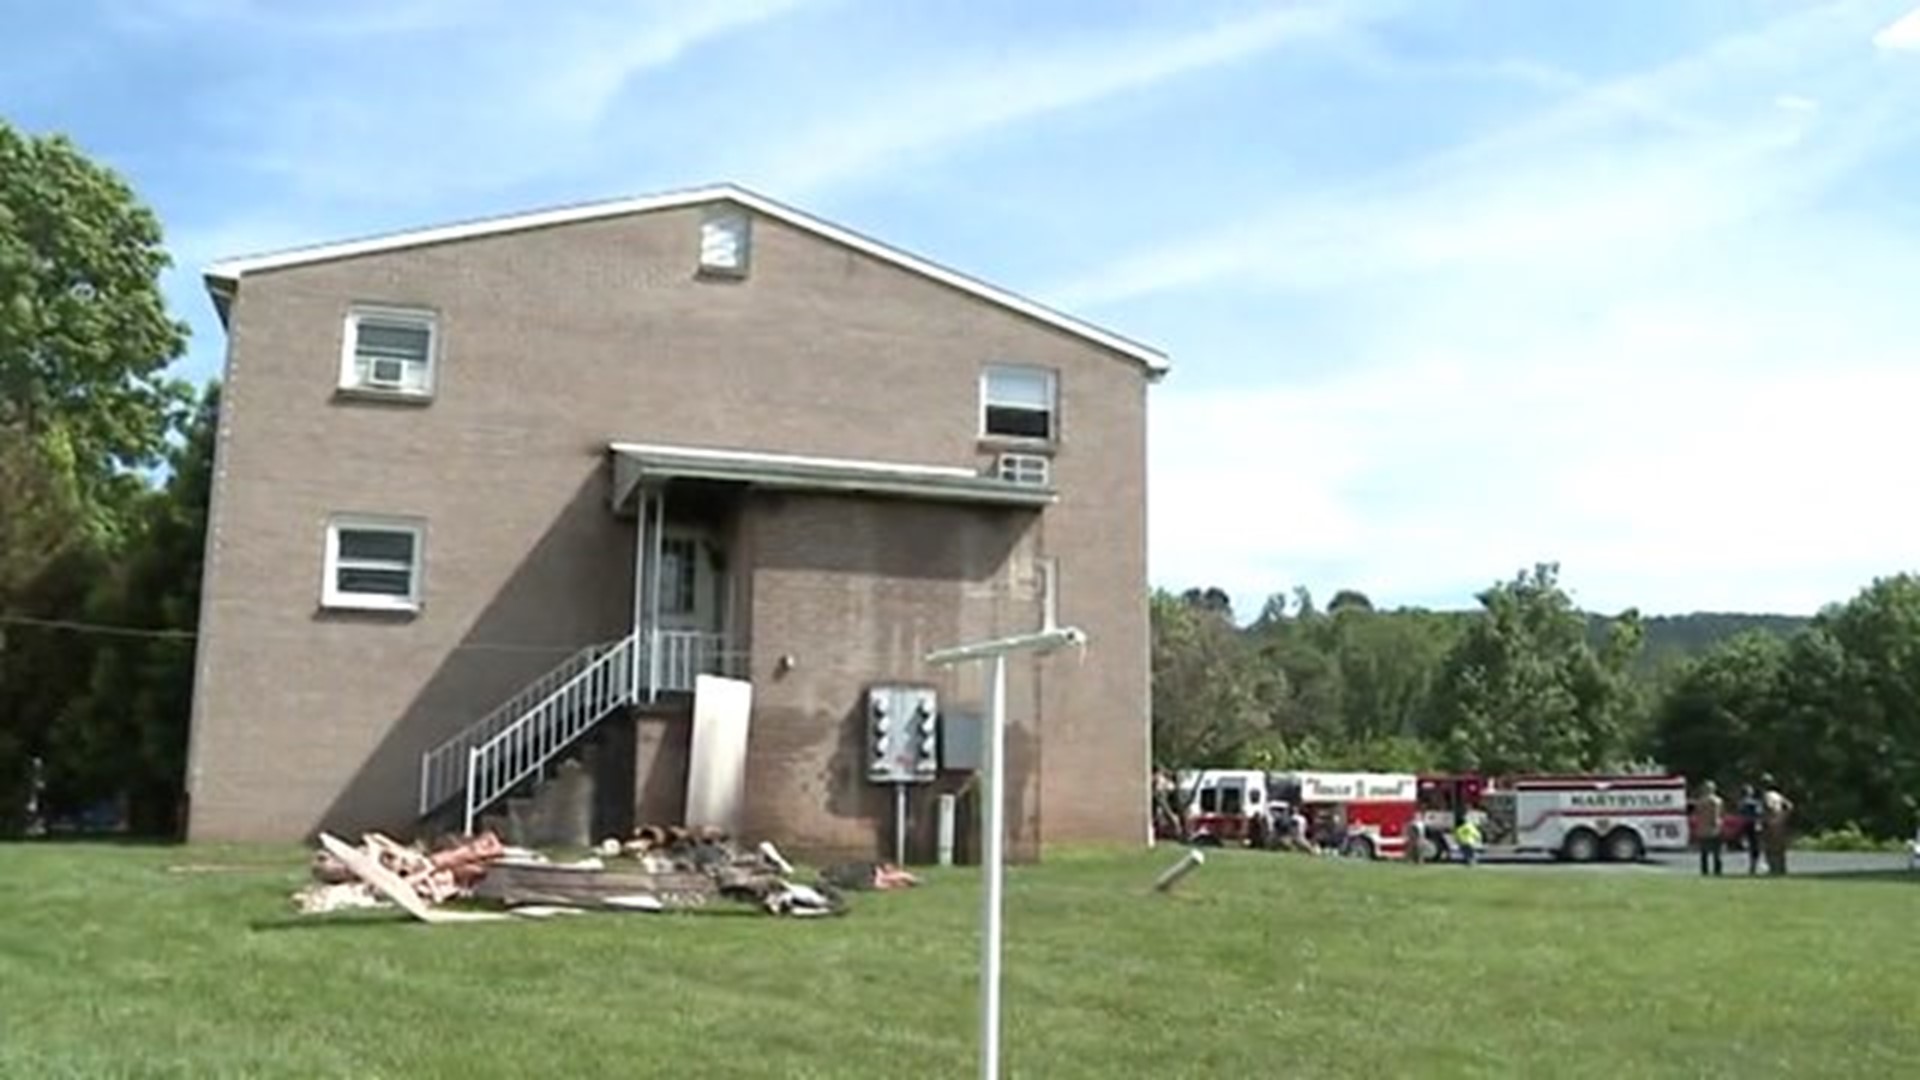 20 homeless in aftermath of apartment fire in Perry County